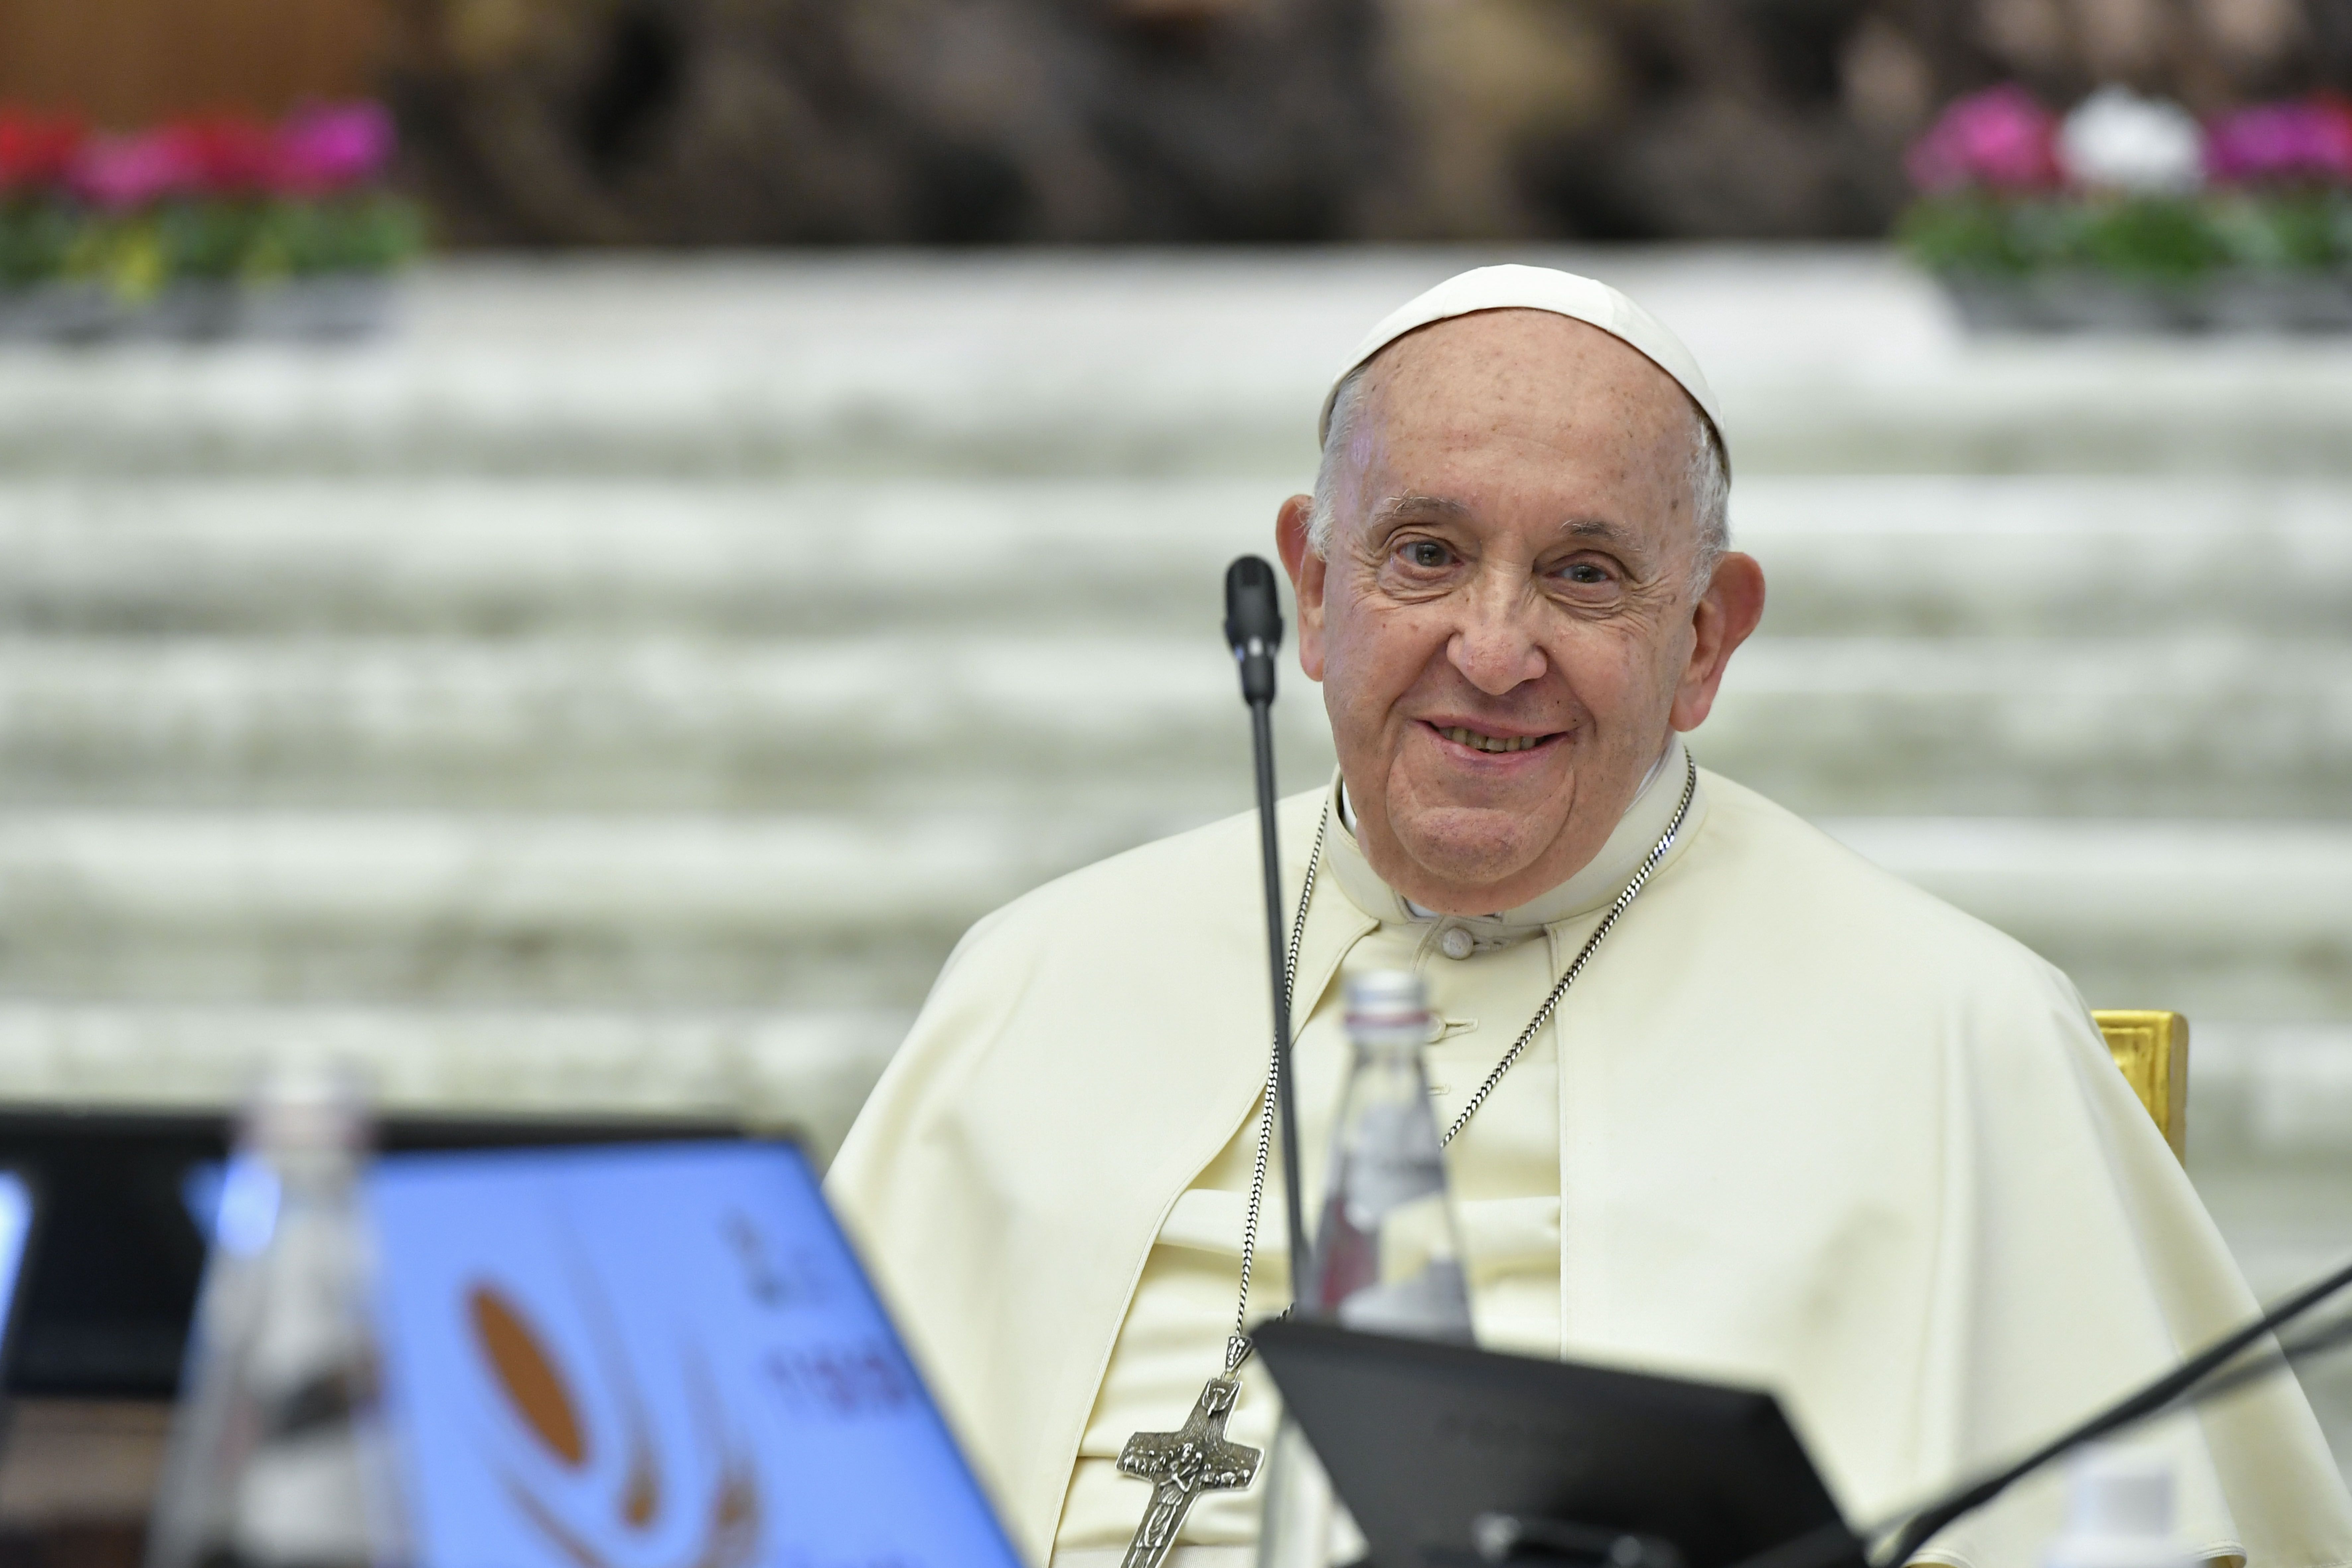 Pope Francis has lunch with Rome’s poor who tell him ‘what they expect from the Church’